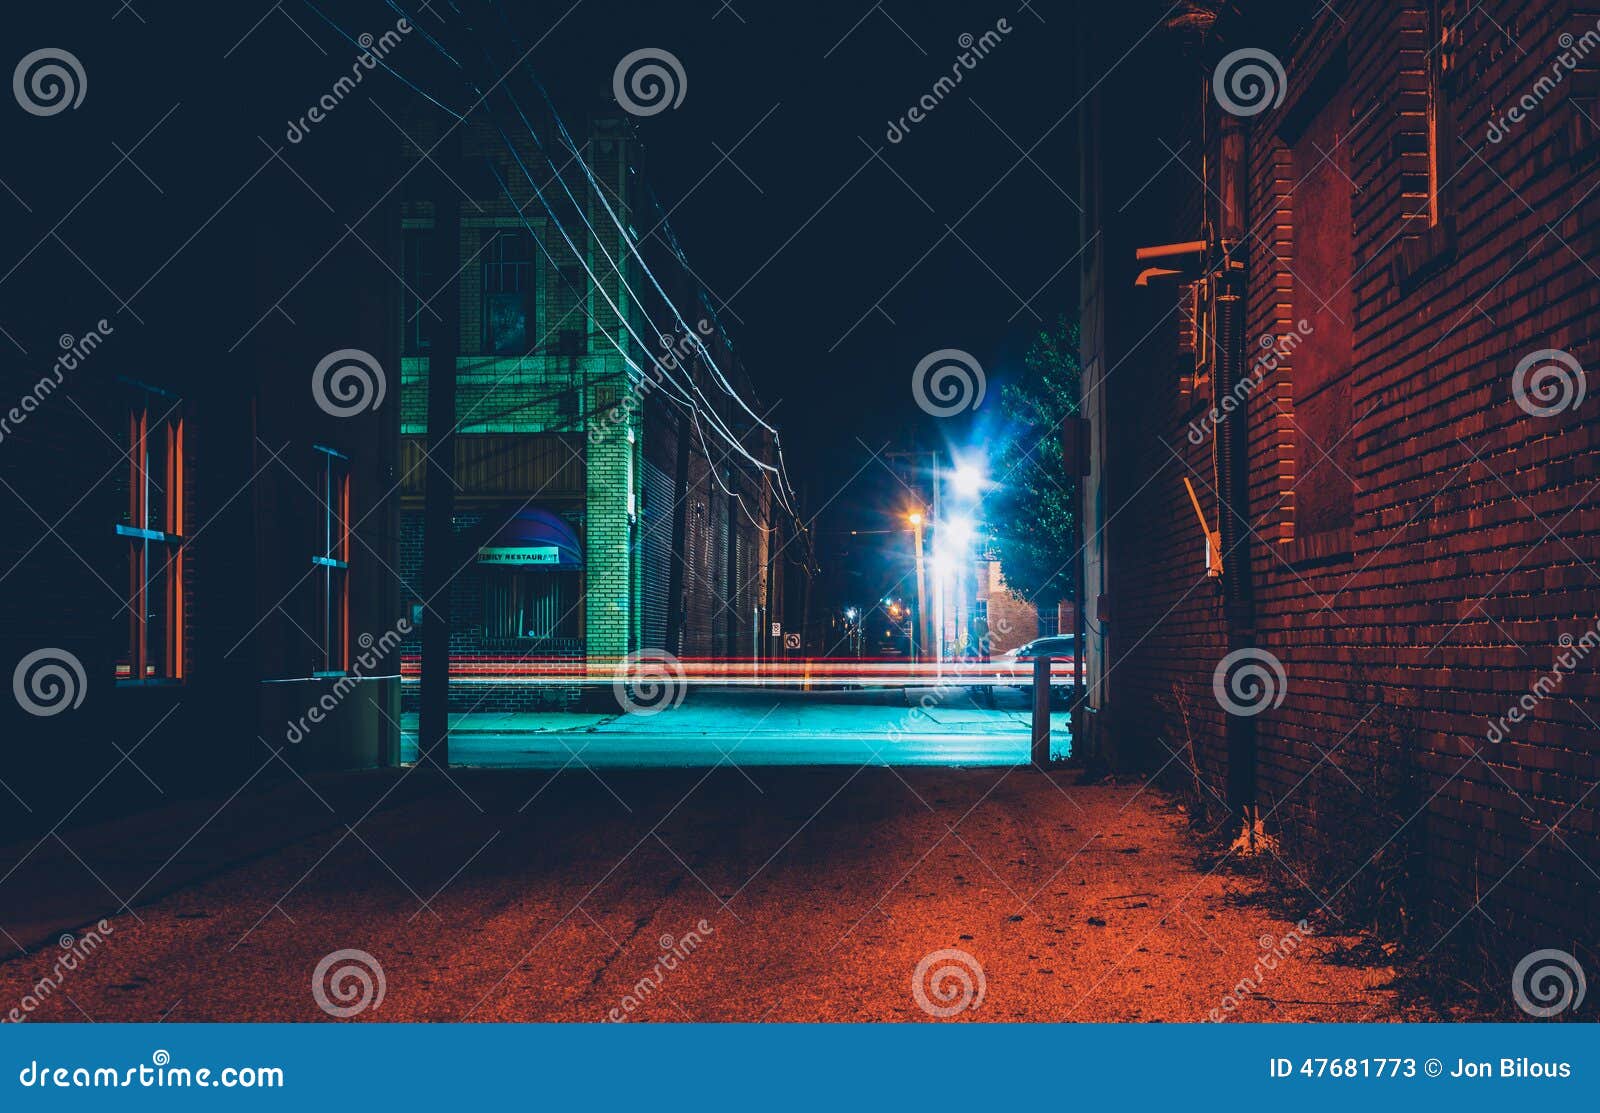 dark alley and light trails in hanover, pennsylvania at night.